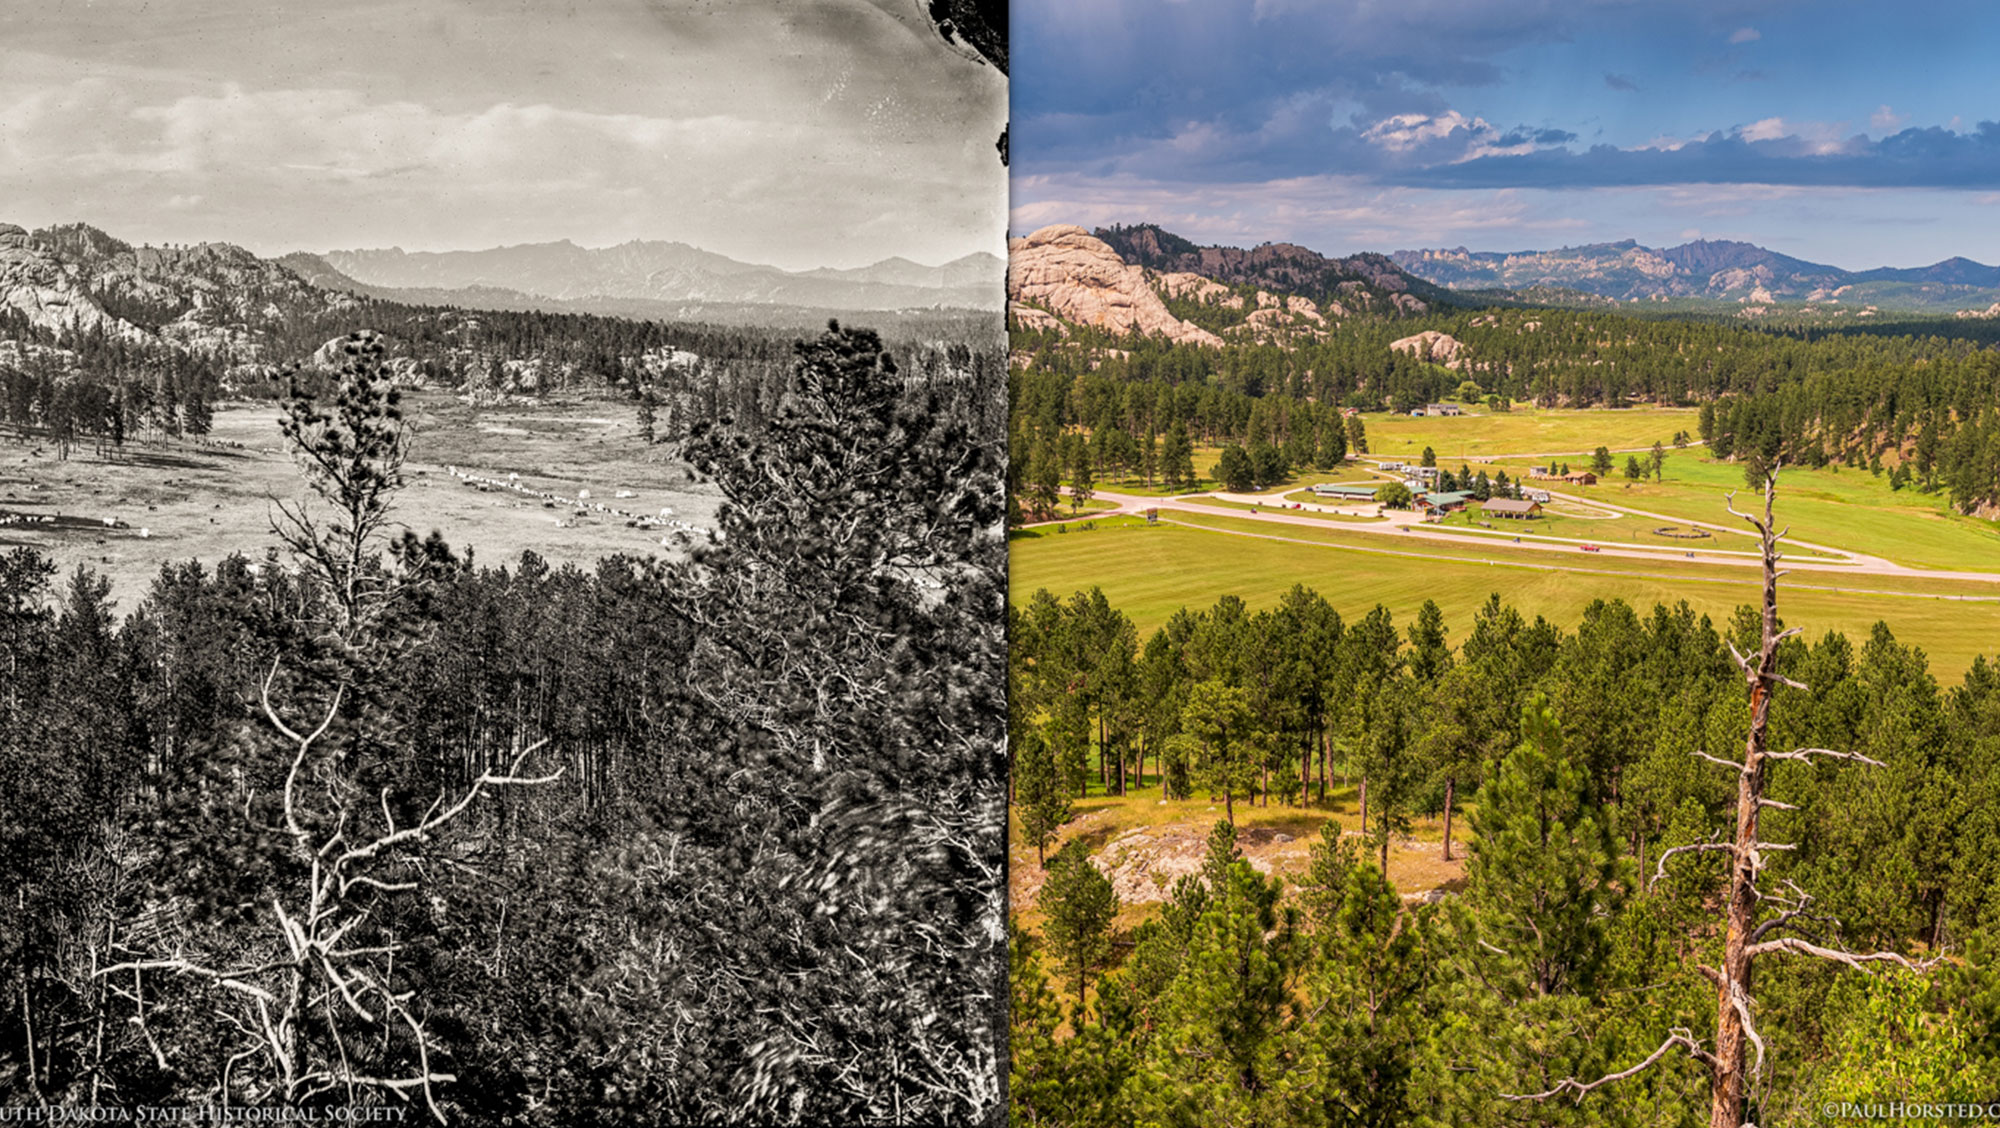 This image shows a split-view of the same landscape of Custer across two different eras, with the left side depicting a historical black-and-white scene of sparse vegetation and scattered trees, and the right side showing a modern, vibrant colored scene of the same landscape with lush greenery and refined development.